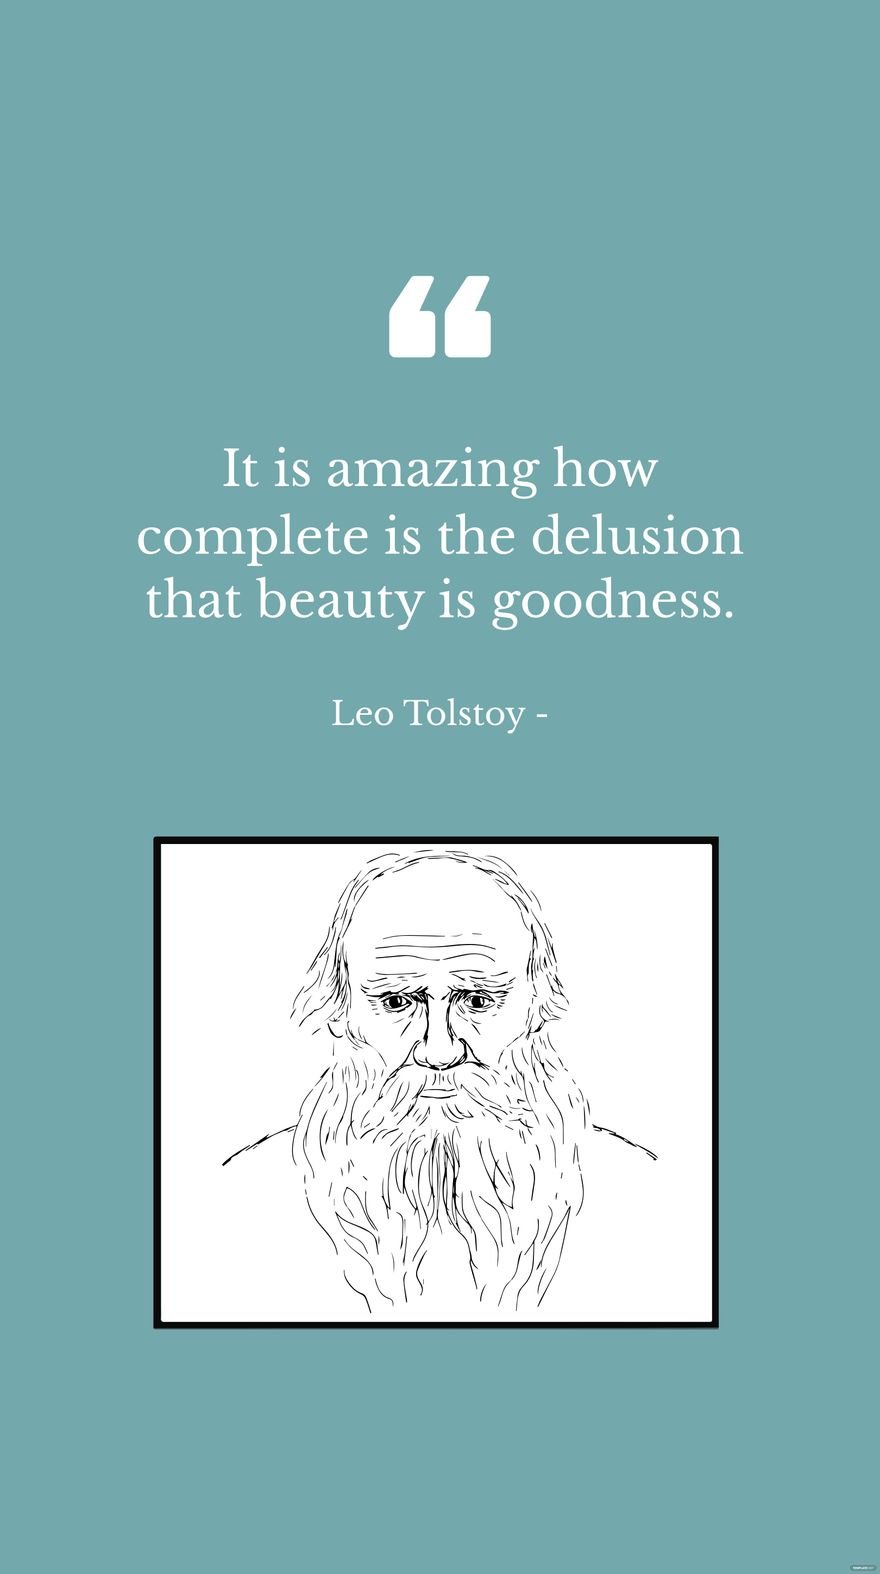 Free Leo Tolstoy - It is amazing how complete is the delusion that beauty is goodness. in JPG